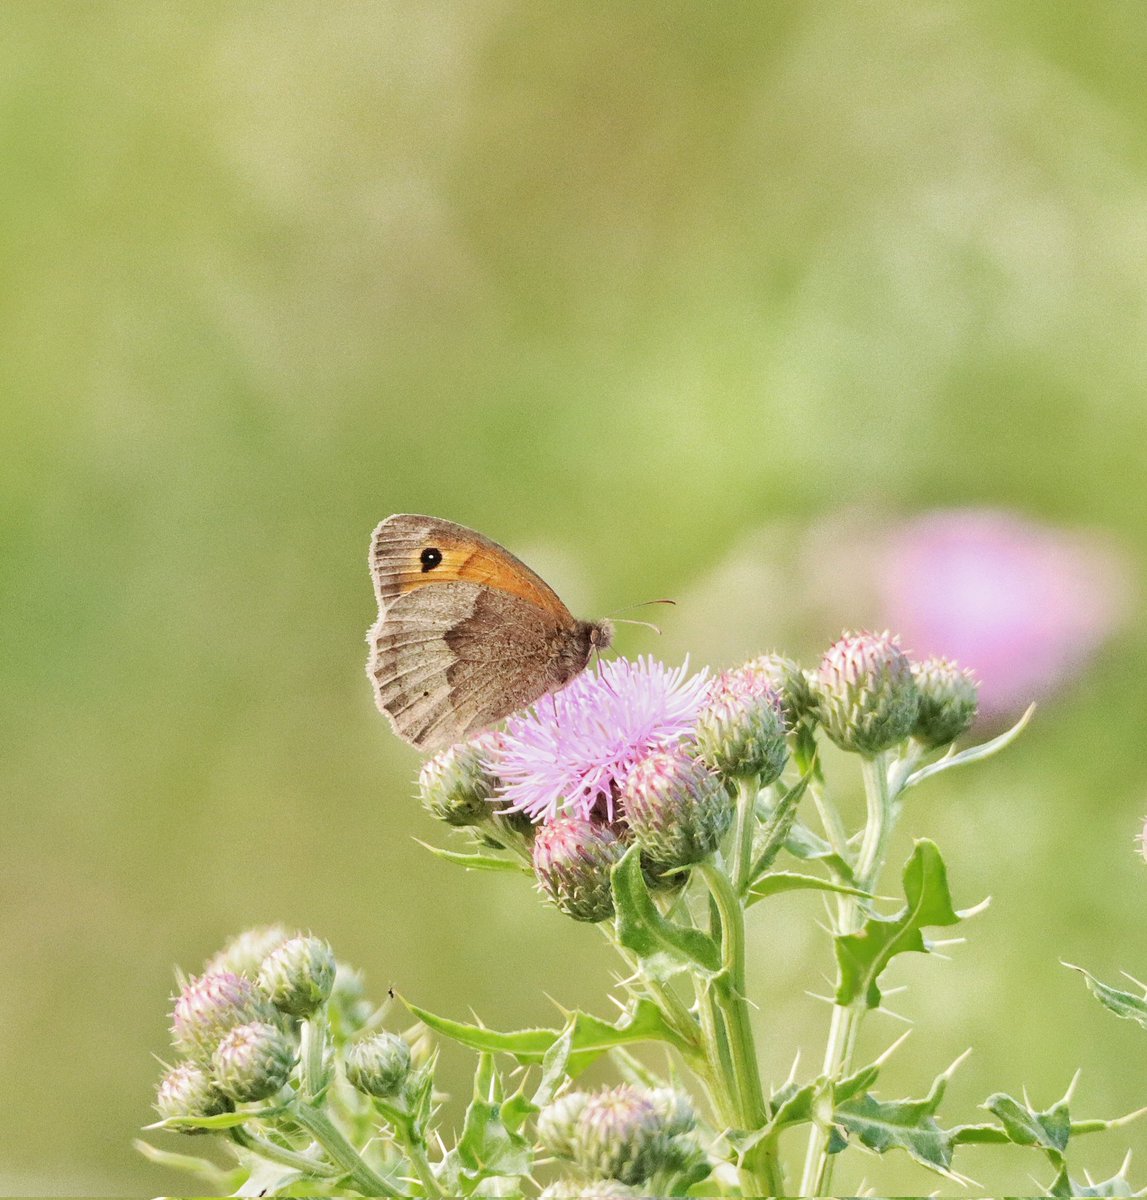 Meadow brown from this mornings walk along the River Tweed near Melrose. #naturephotography #scottishborders #twitternaturecommunity #butterflies #rivertweed